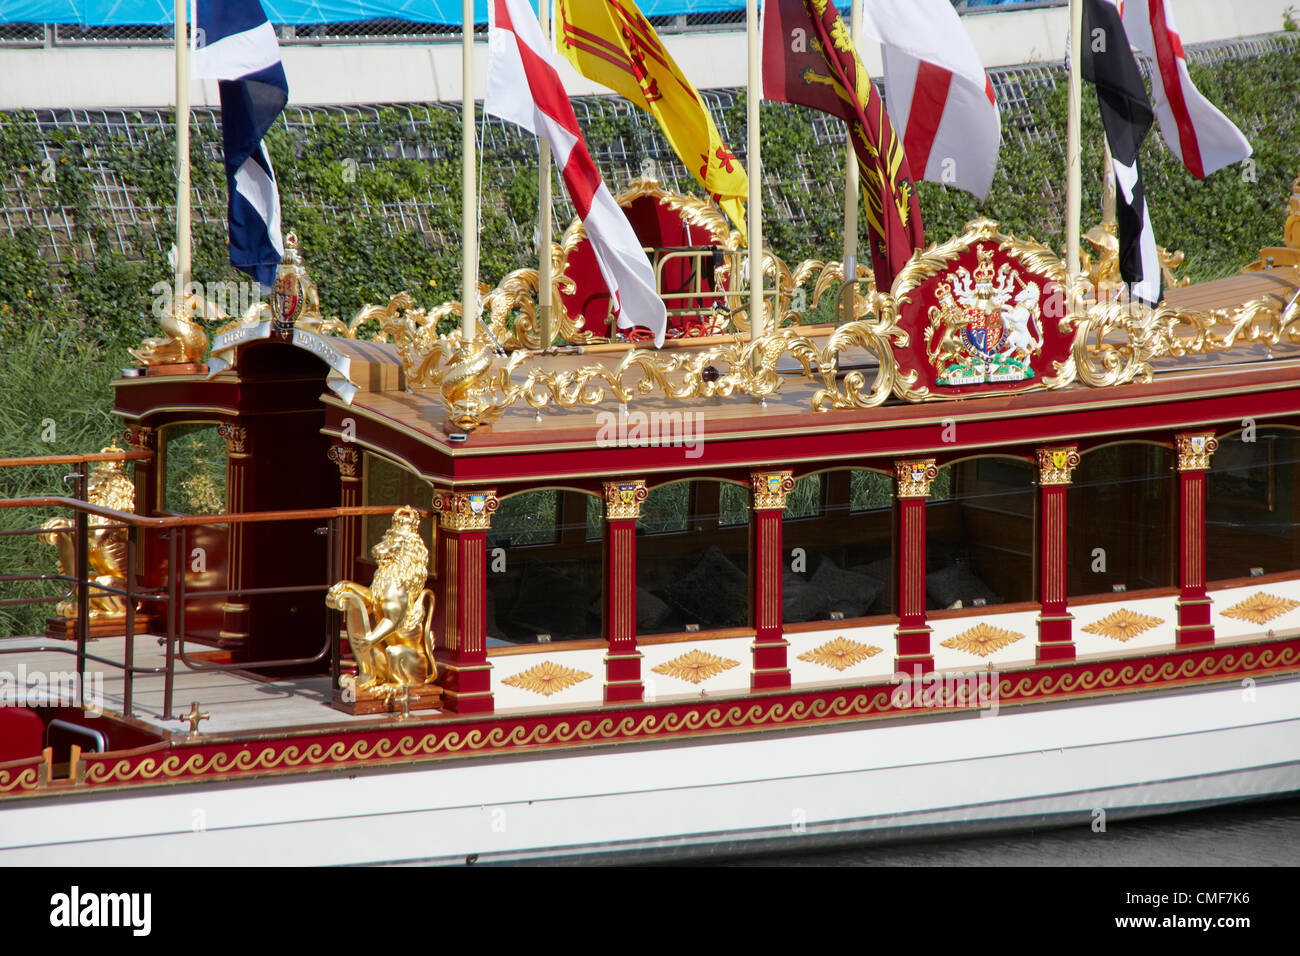 Royal Barge on River Lea at Olympic Park, London 2012 Olympic Games site, Stratford London E20 UK, Stock Photo